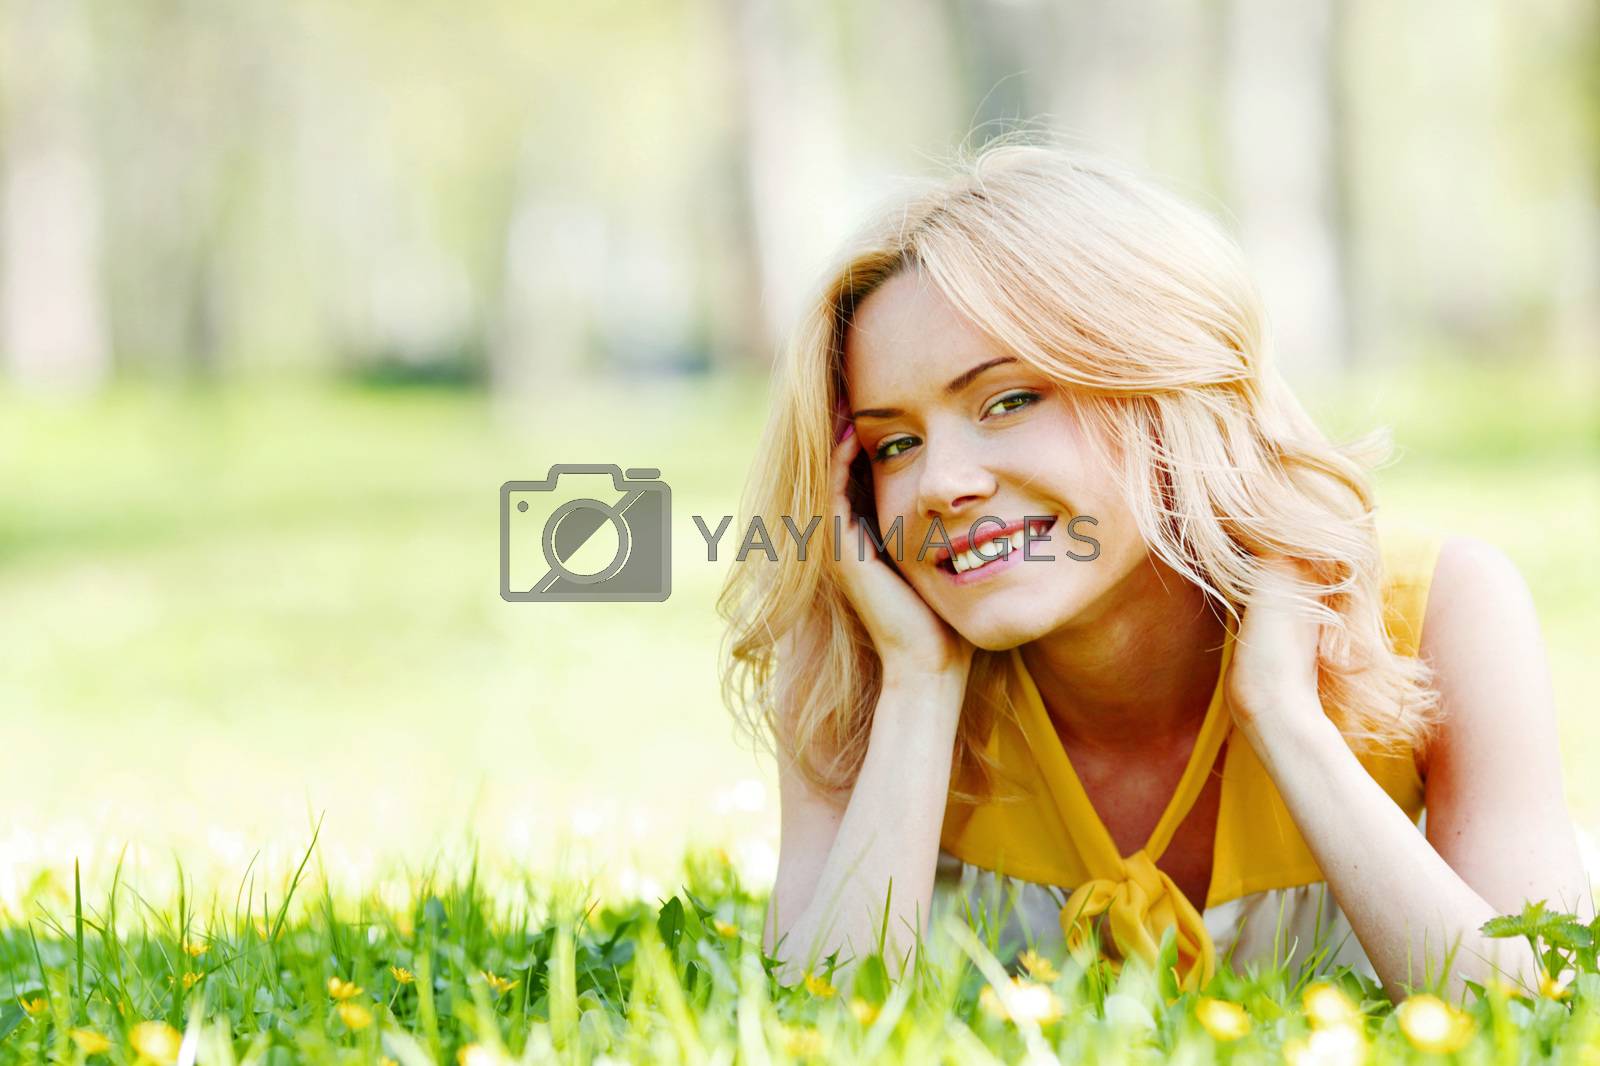 Royalty free image of Young woman on grass by Yellowj